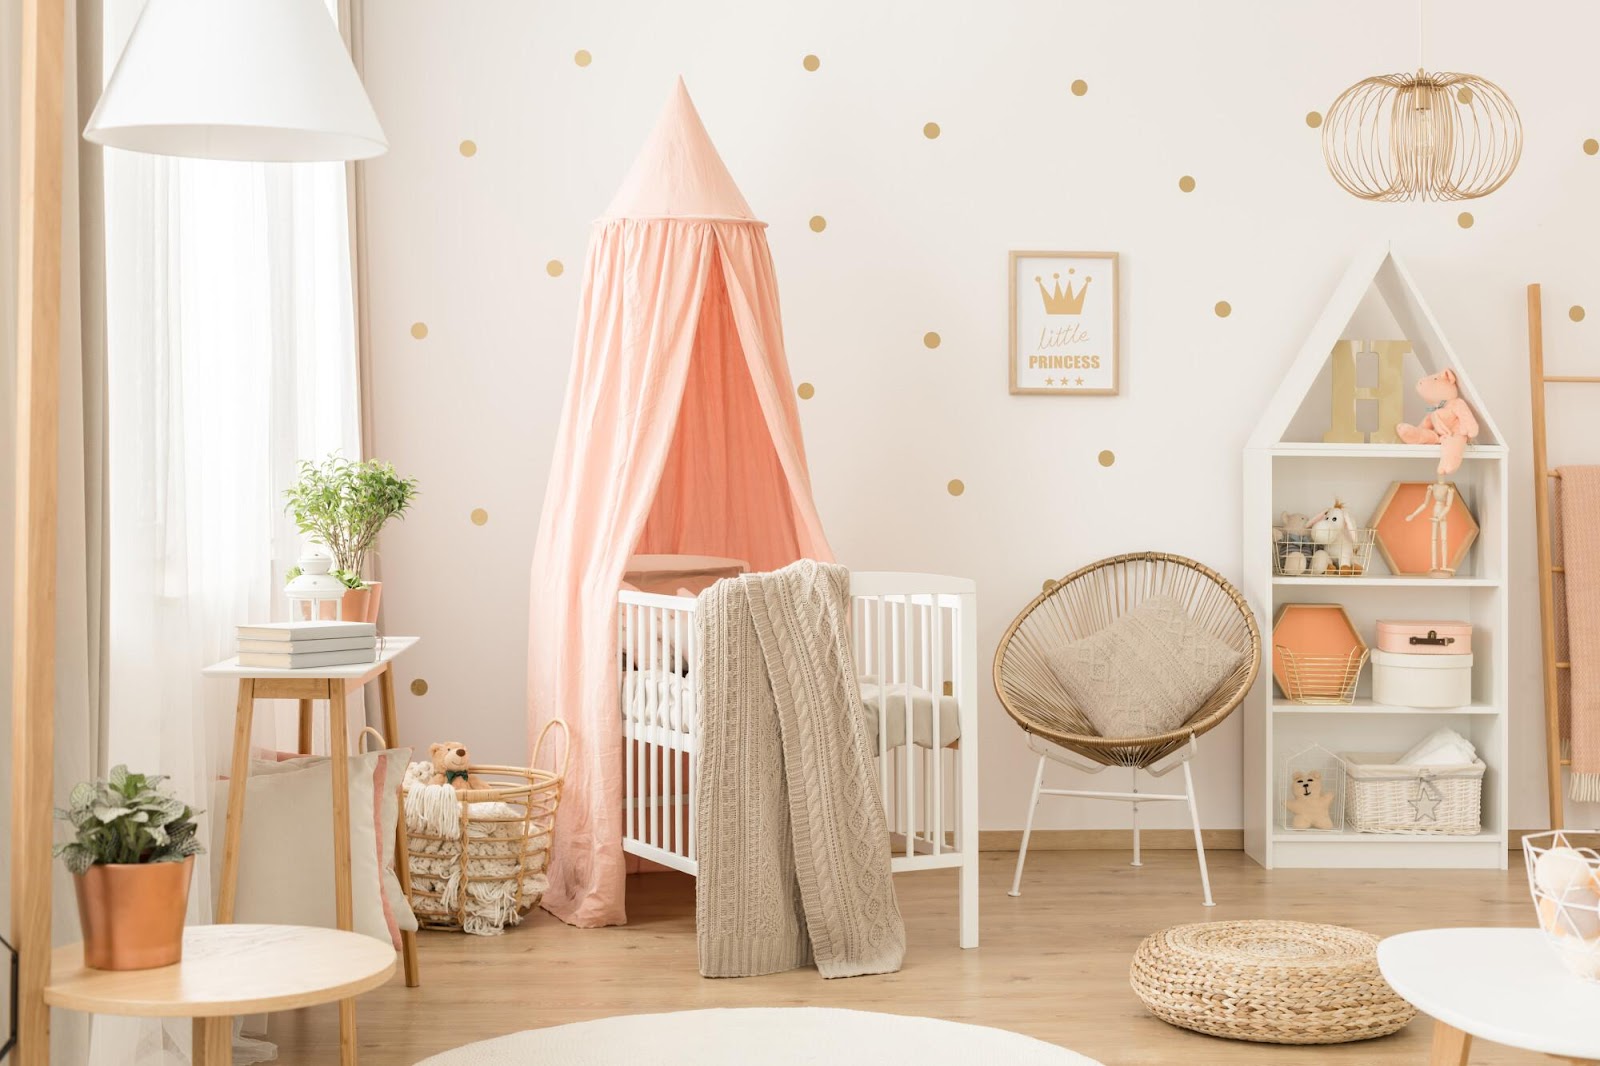 6 tips to help you plan a perfect baby’s nursery